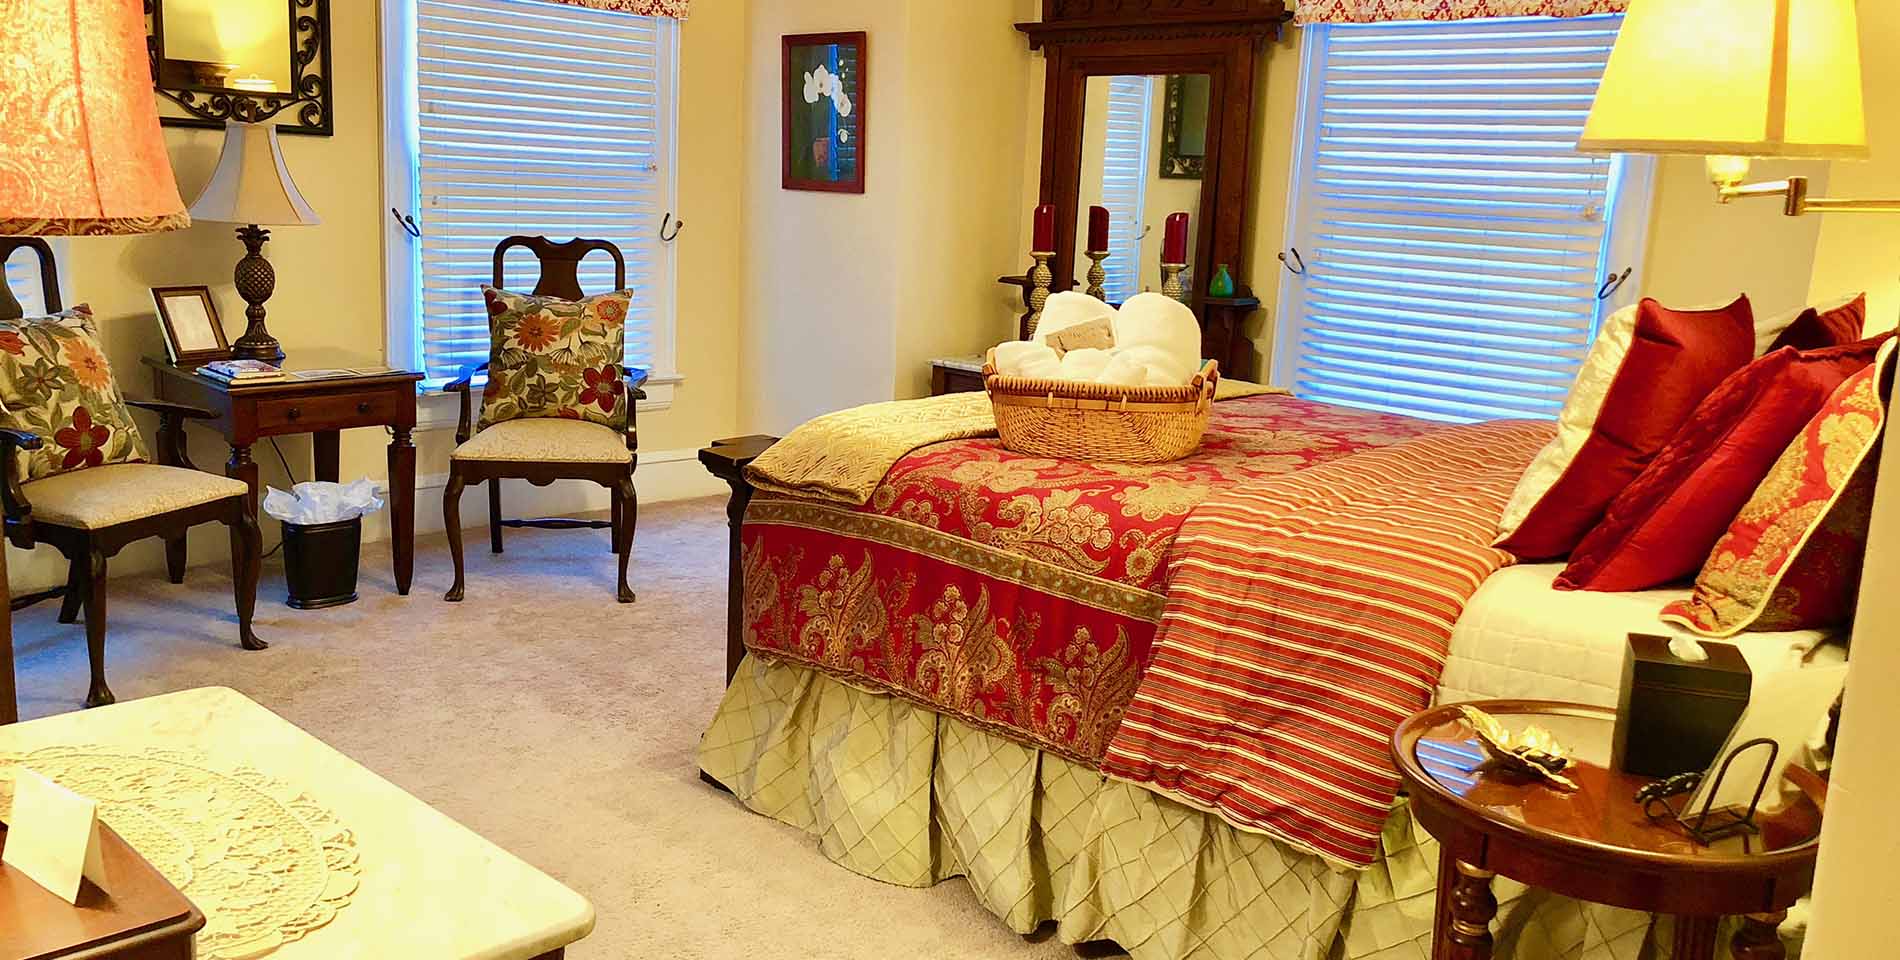 A large bed with a red and gold comforter, red throw pillows and gold bedskirt near a nightstand. 